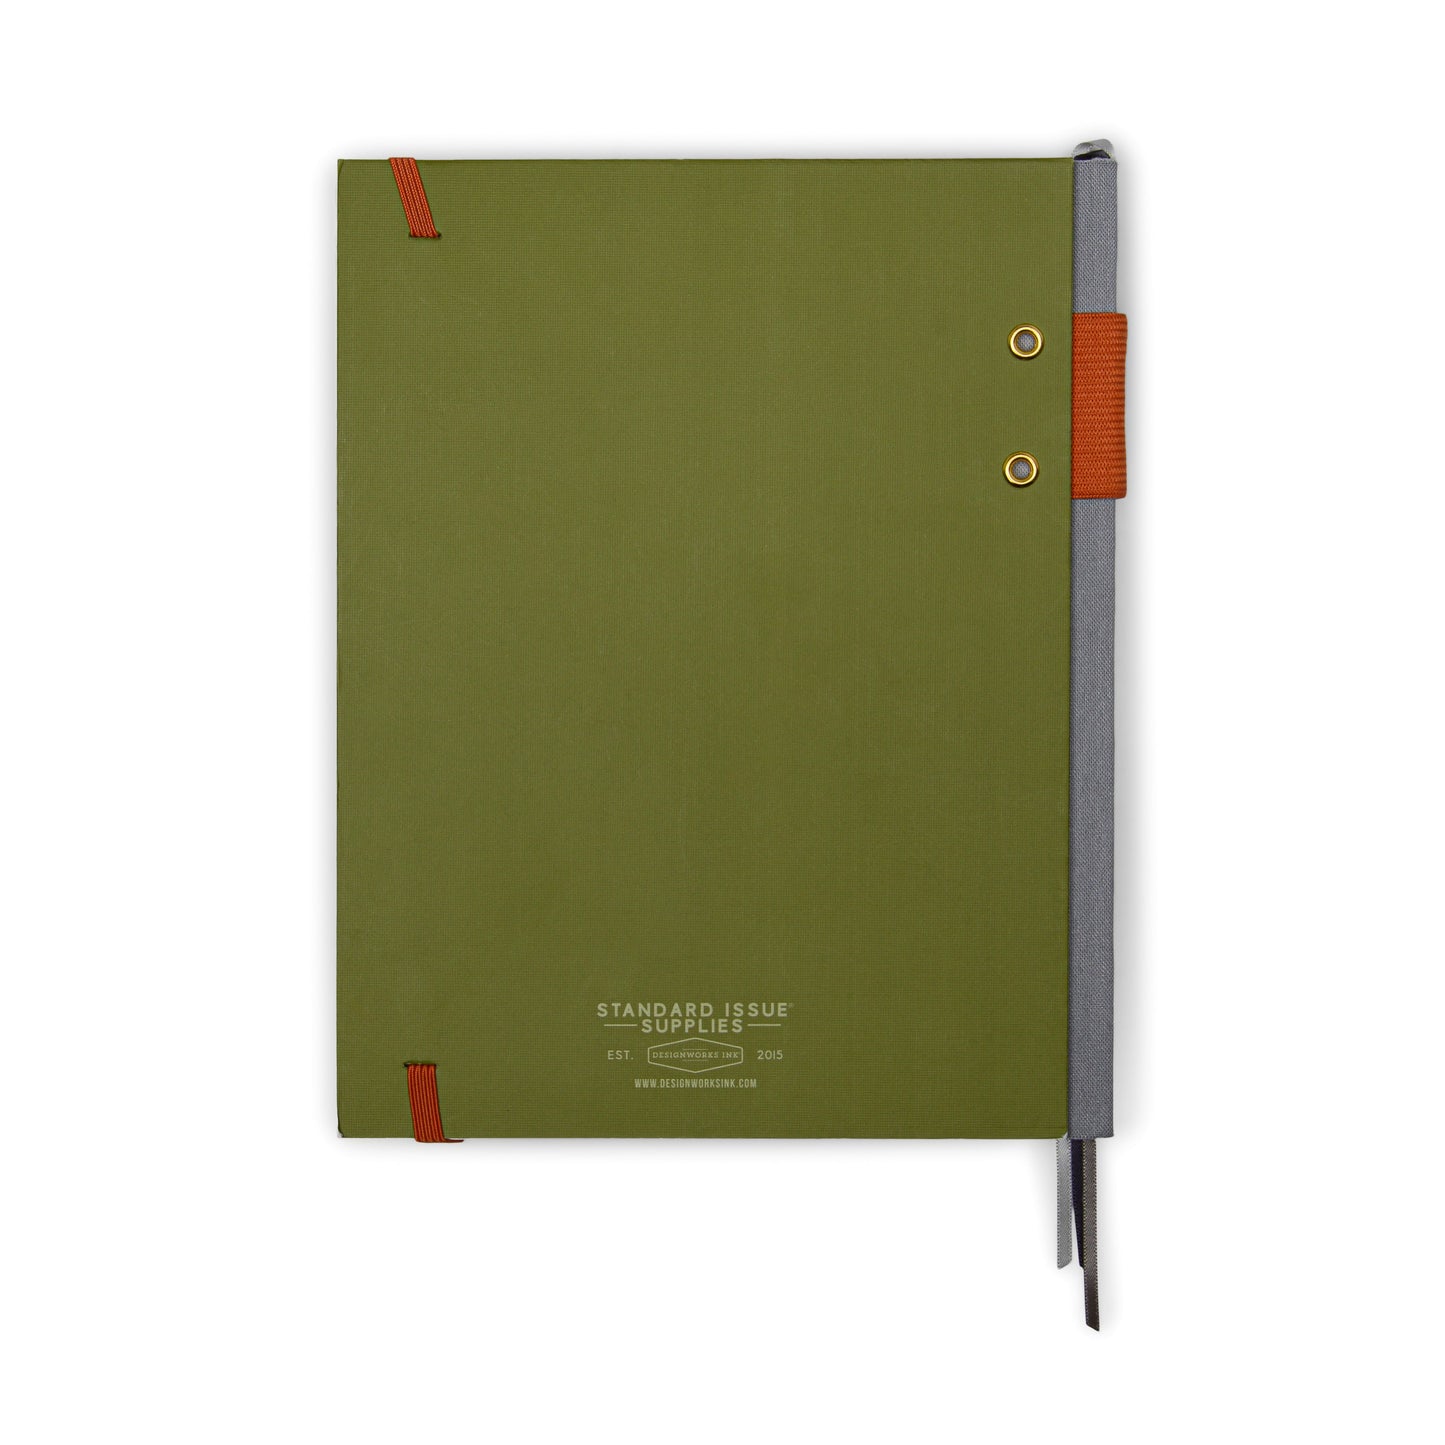 Standard Issue Planner Notebook No. 03 - Army Green + Chili